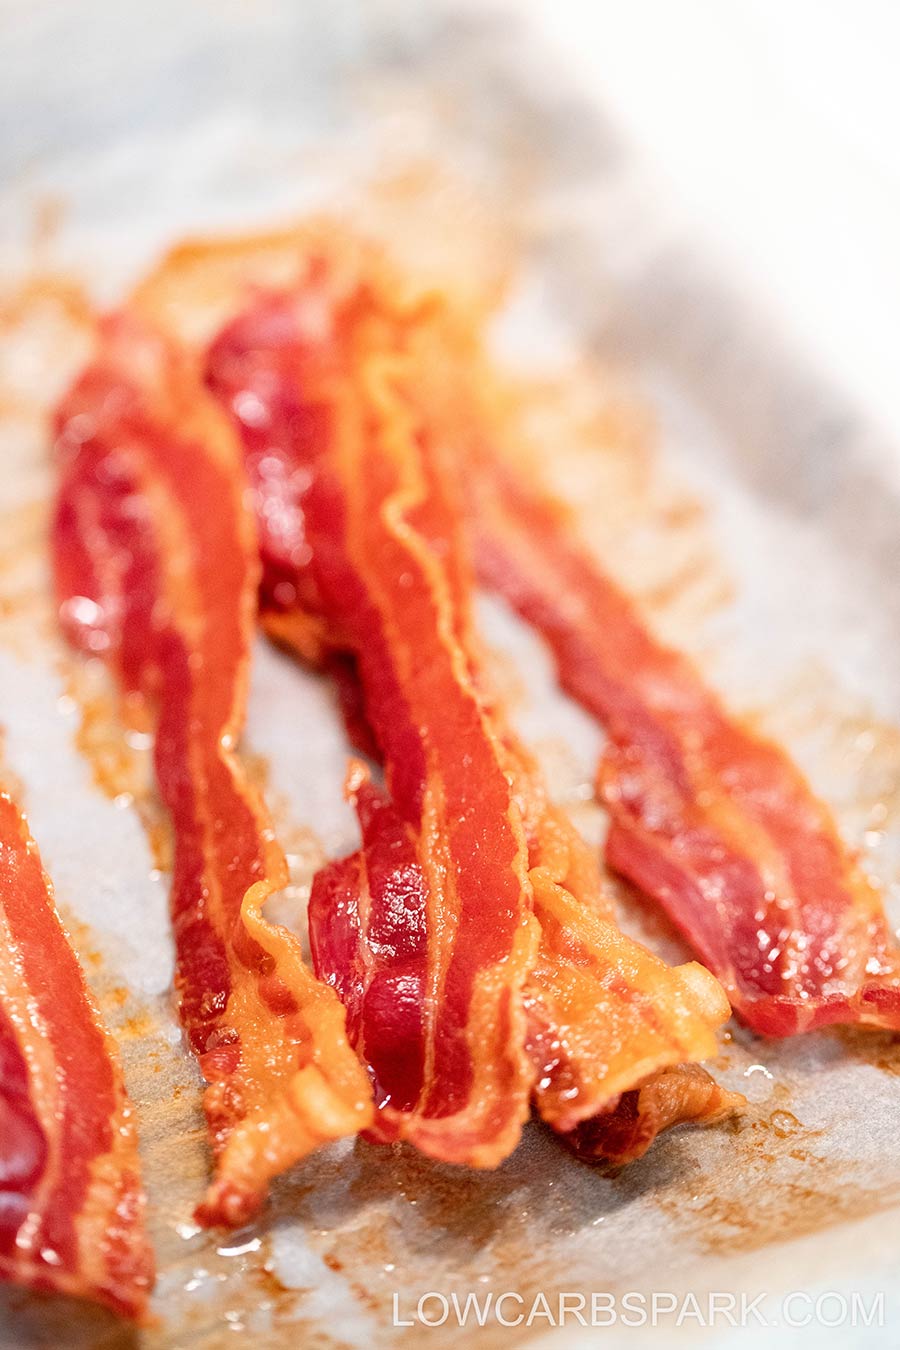 How to Cook Bacon in the Oven - {Crispy Baked Bacon} - Kristine's Kitchen